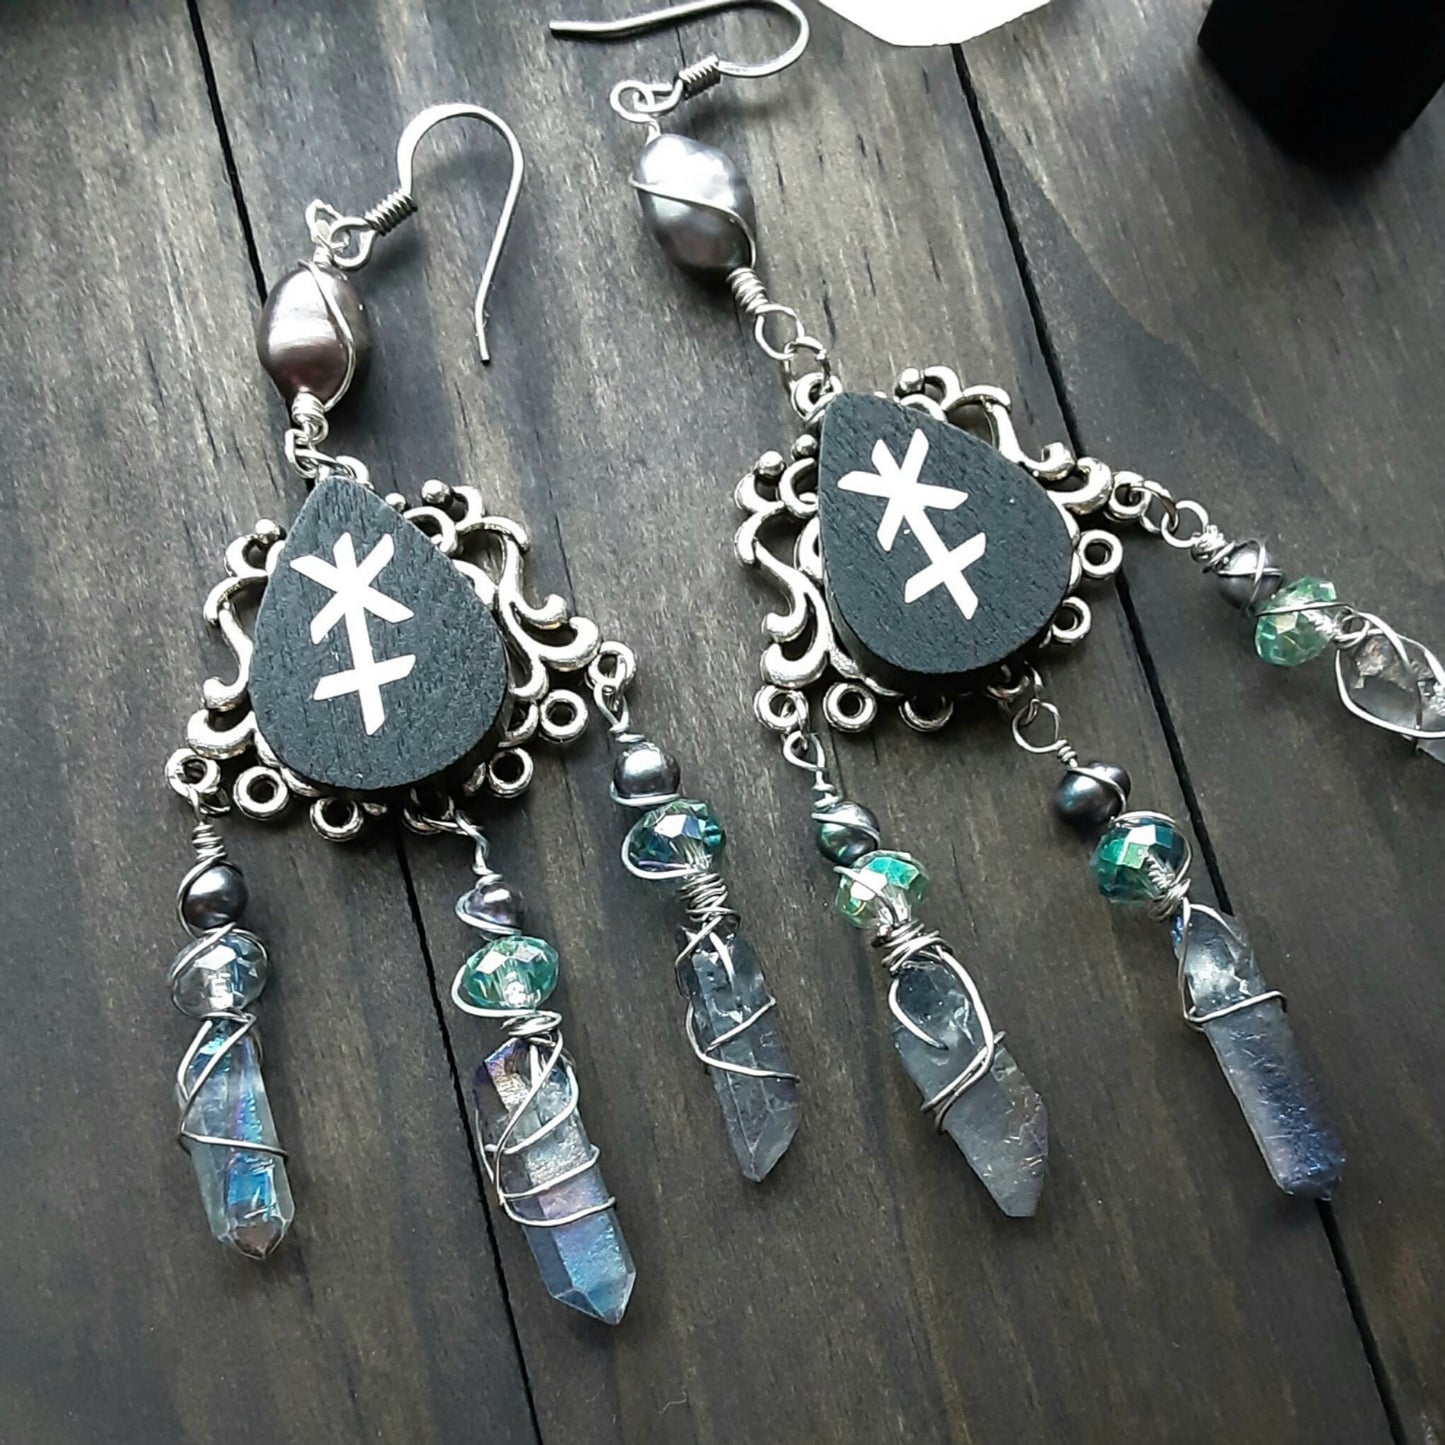 Hera Astrology symbol earrings with peacock pearls and Quartz shards on wooden background